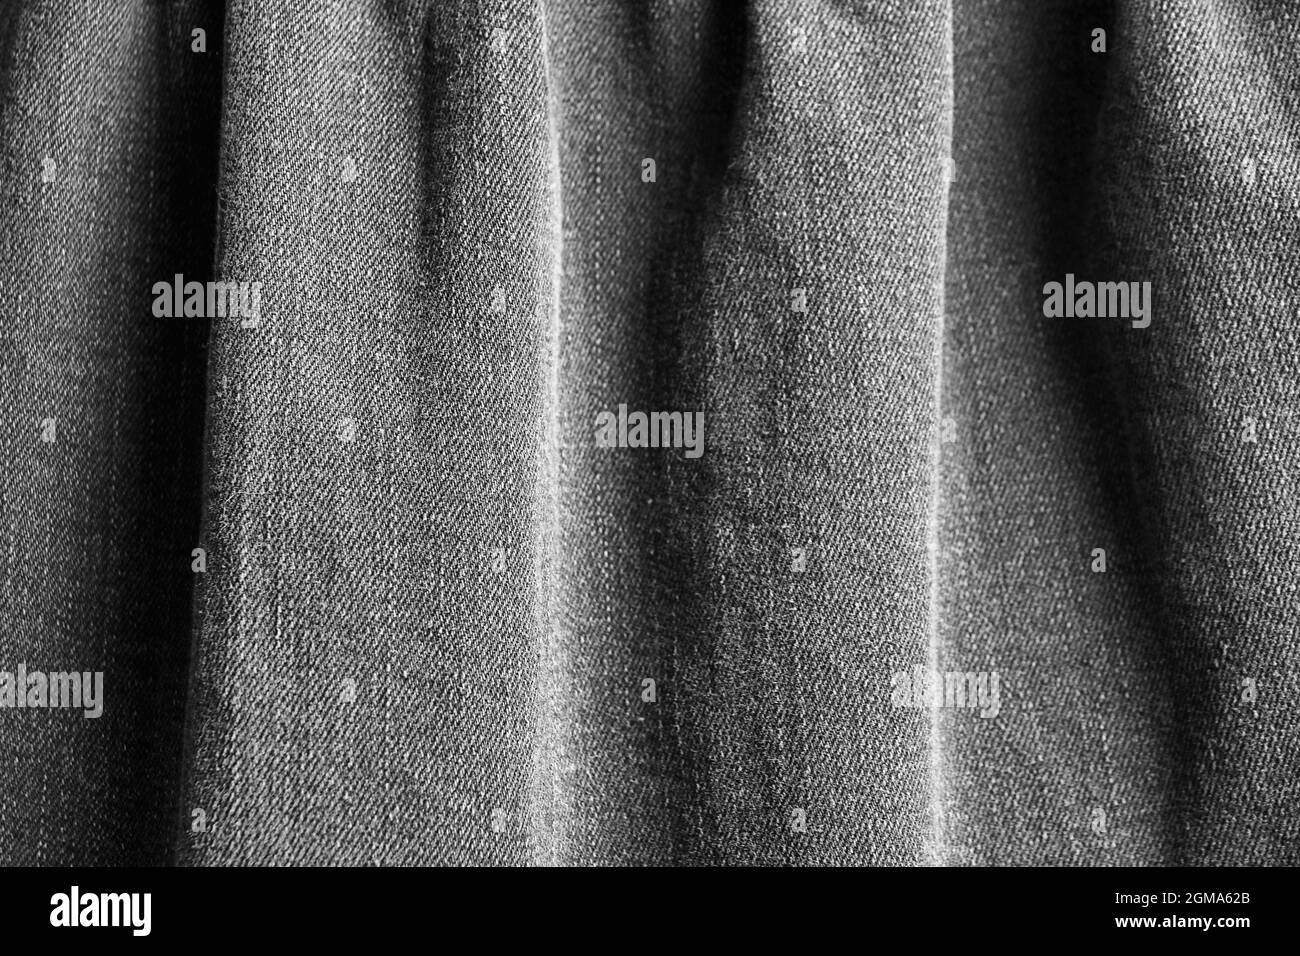 Draped fabric texture as background Stock Photo - Alamy